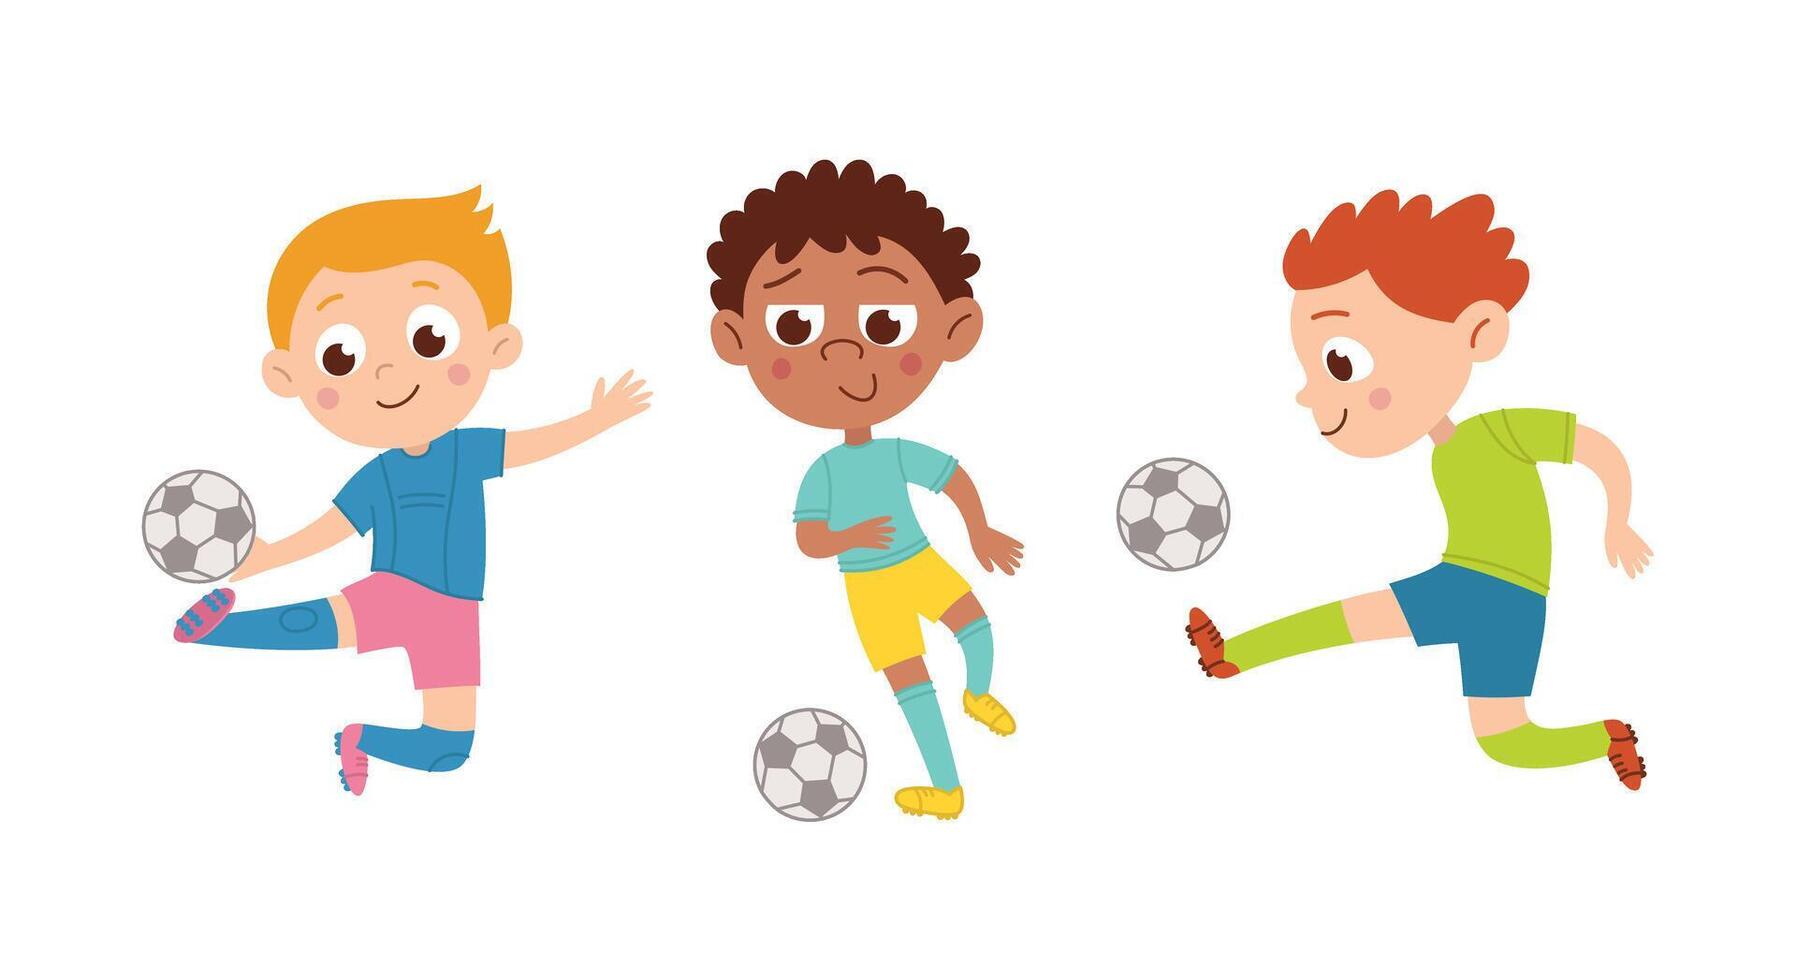 Young football players. A boy plays with a ball. International. Different poses. Vector flat cartoon illustration isolated